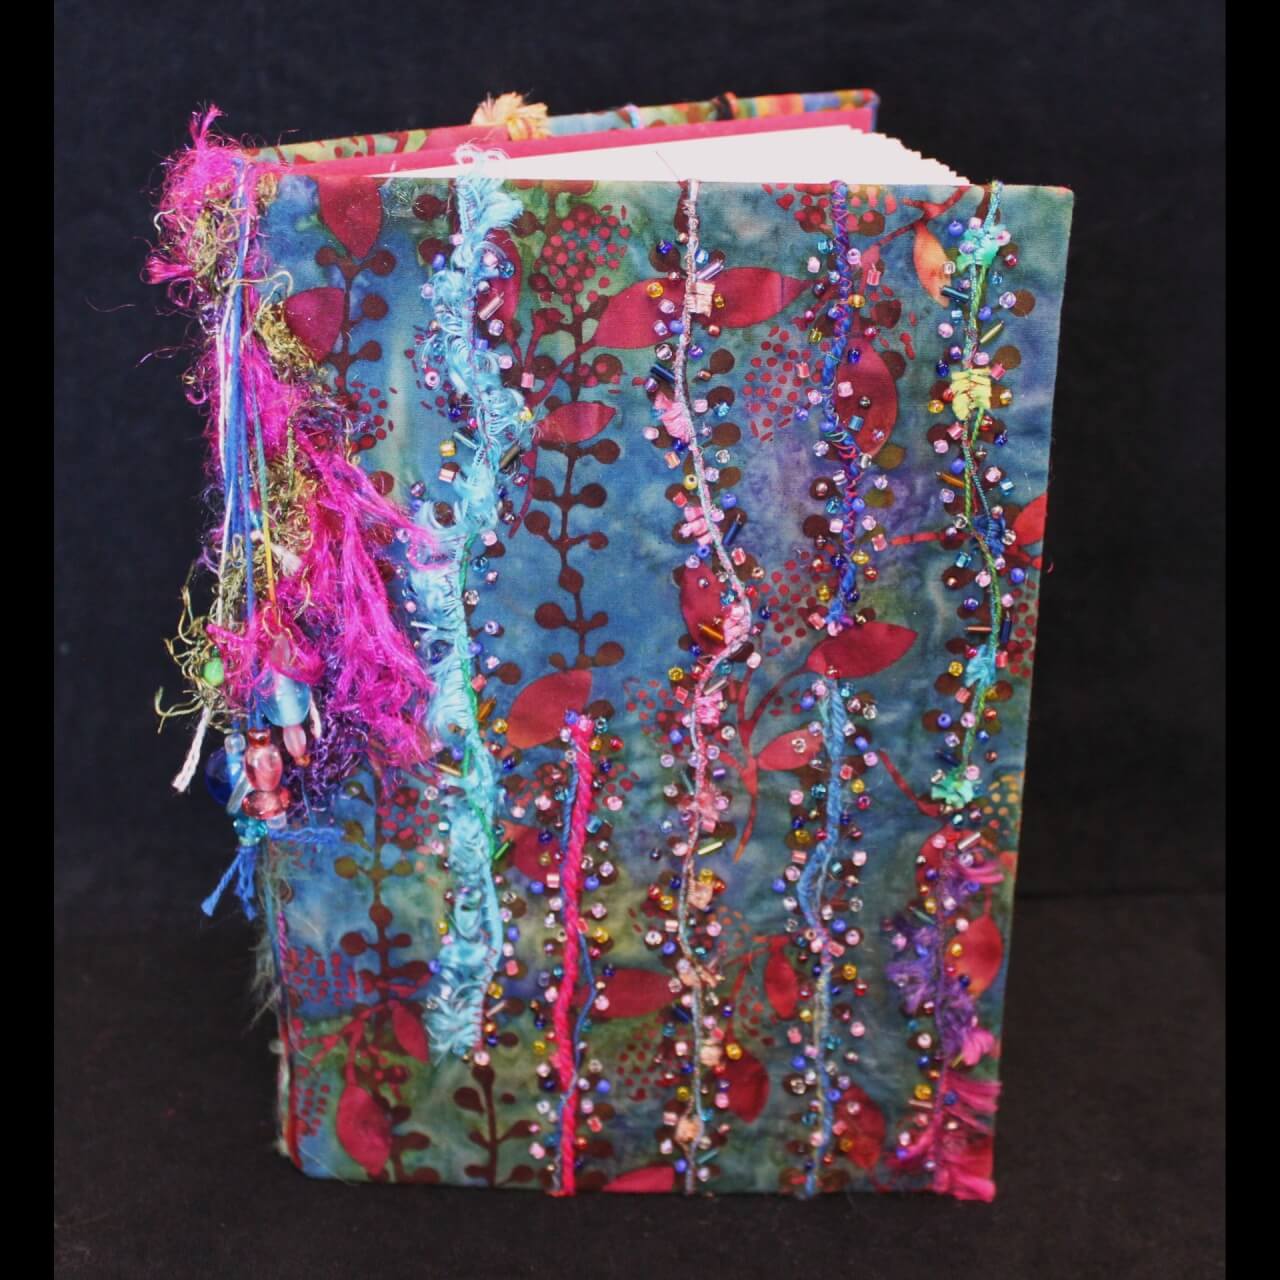 blank book covered in colorful fabric